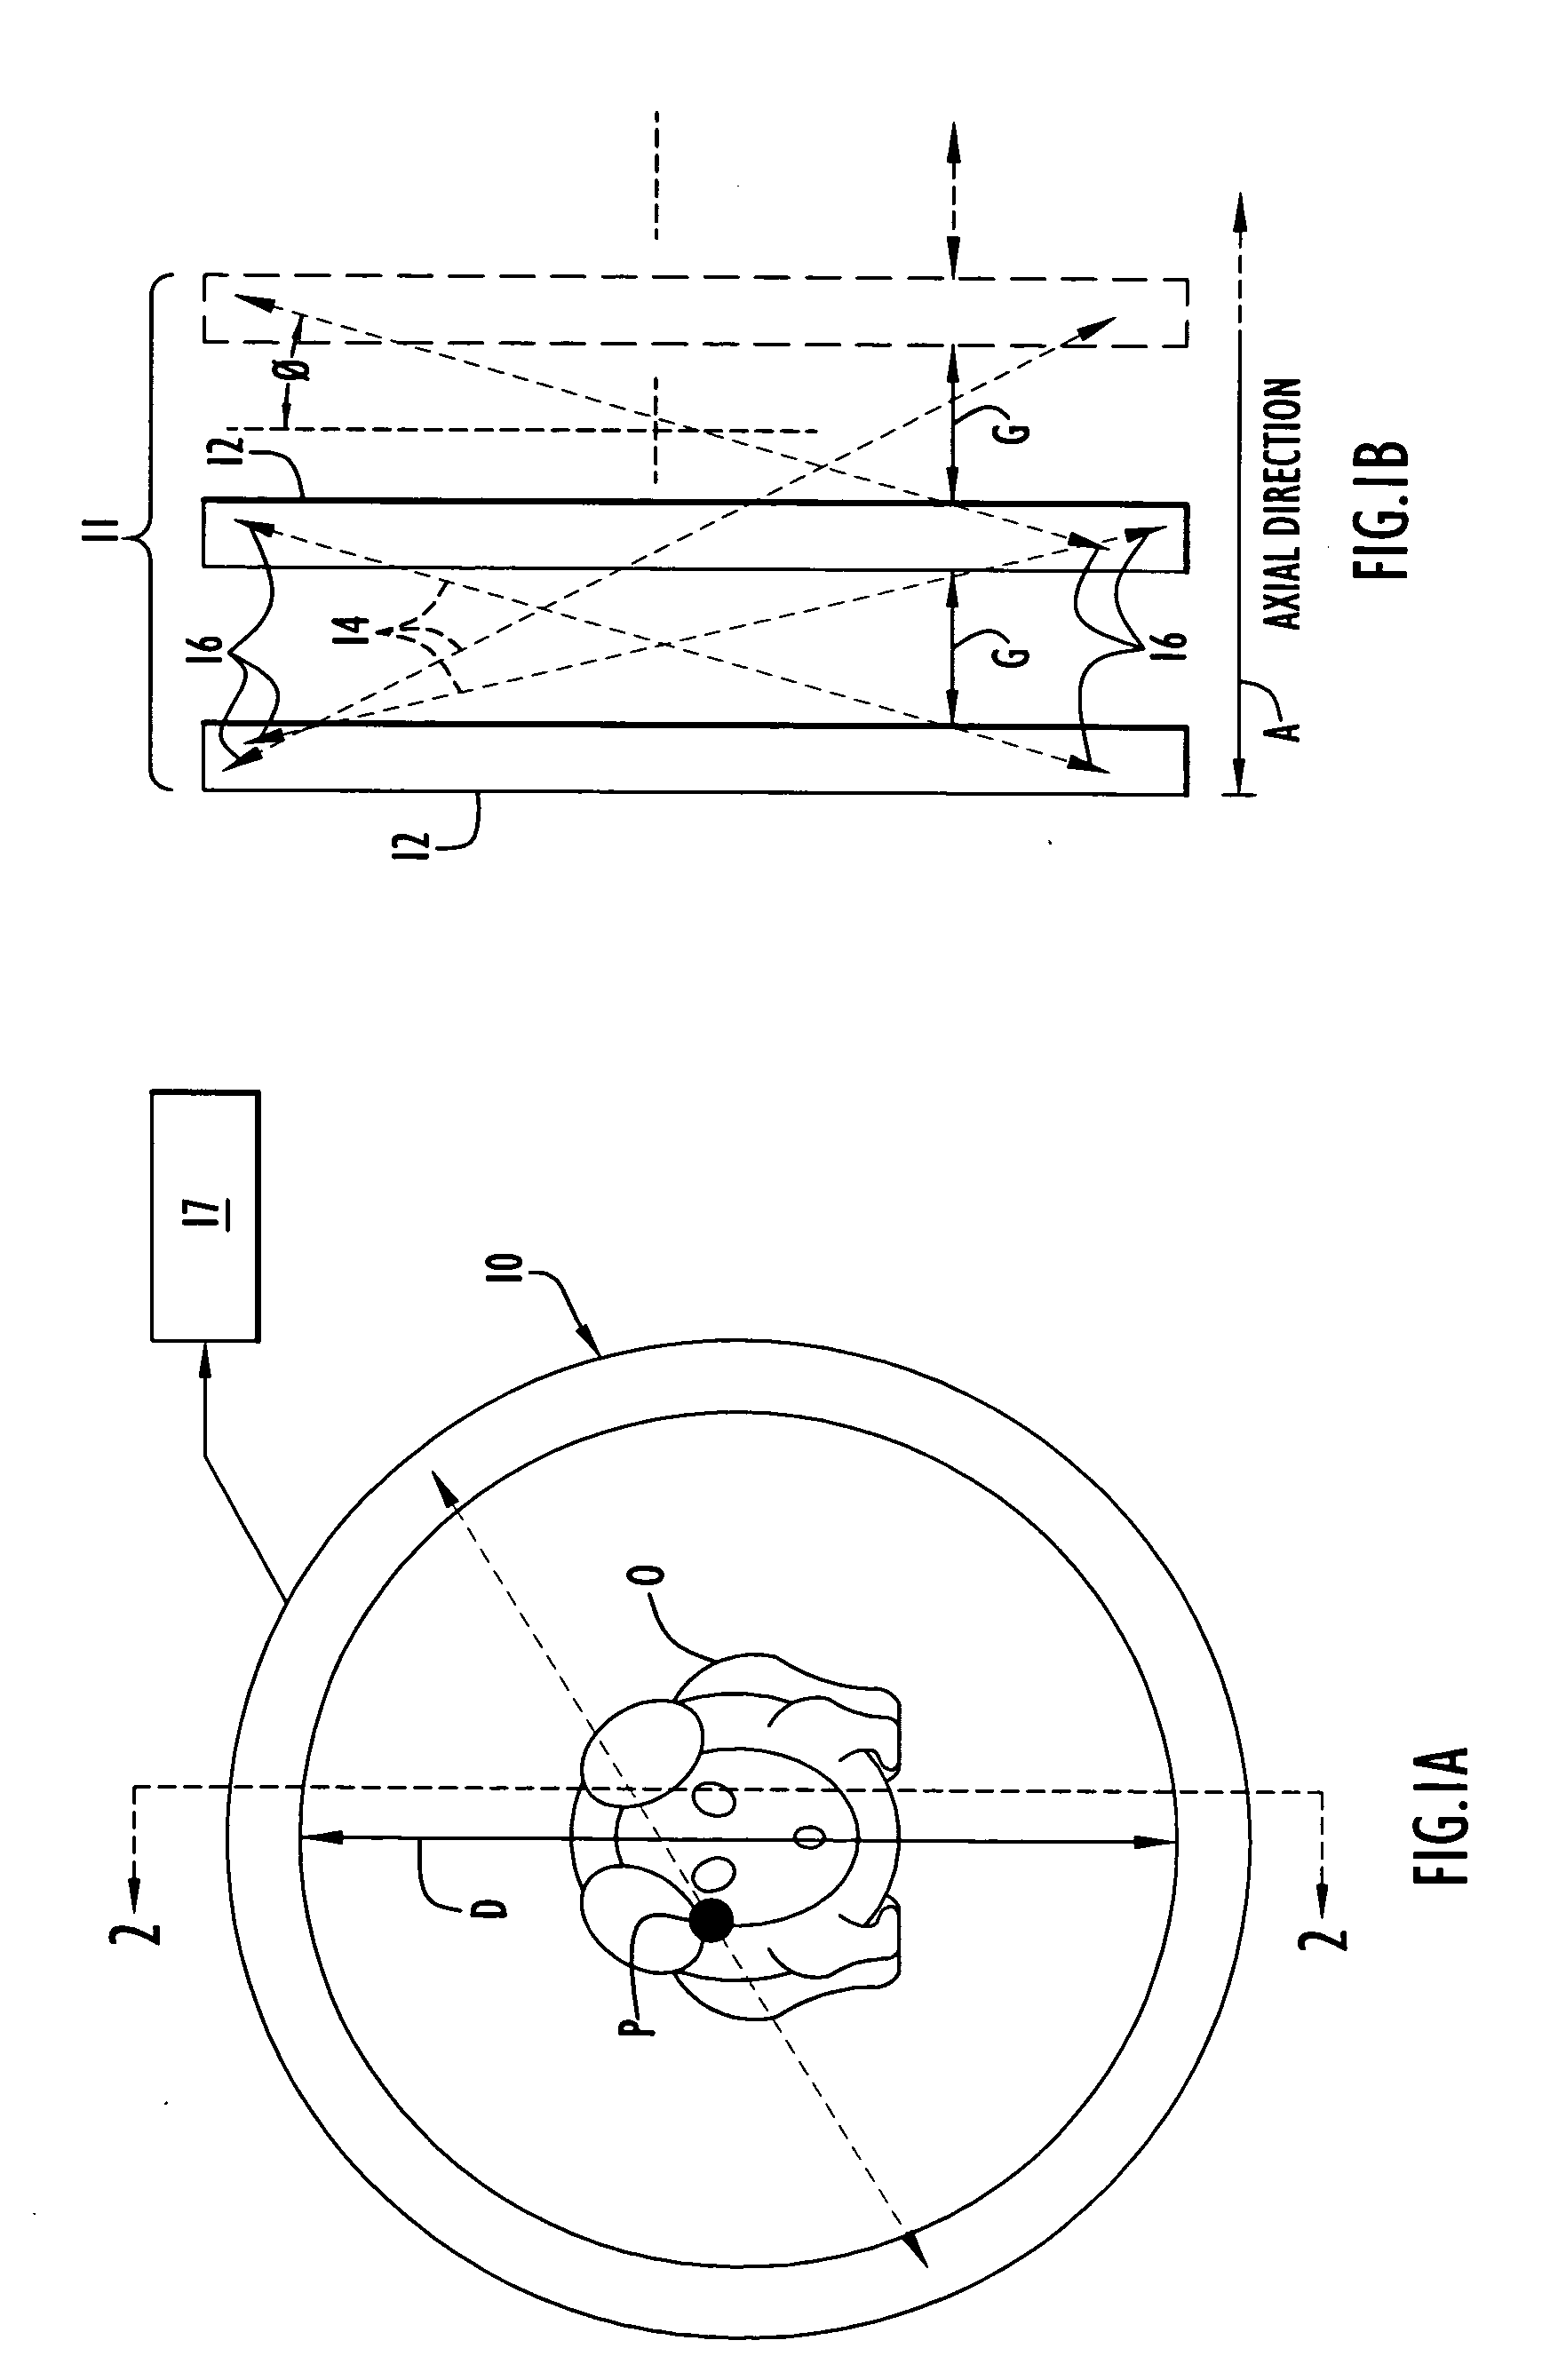 Tomography scanner with axially discontinuous detector array